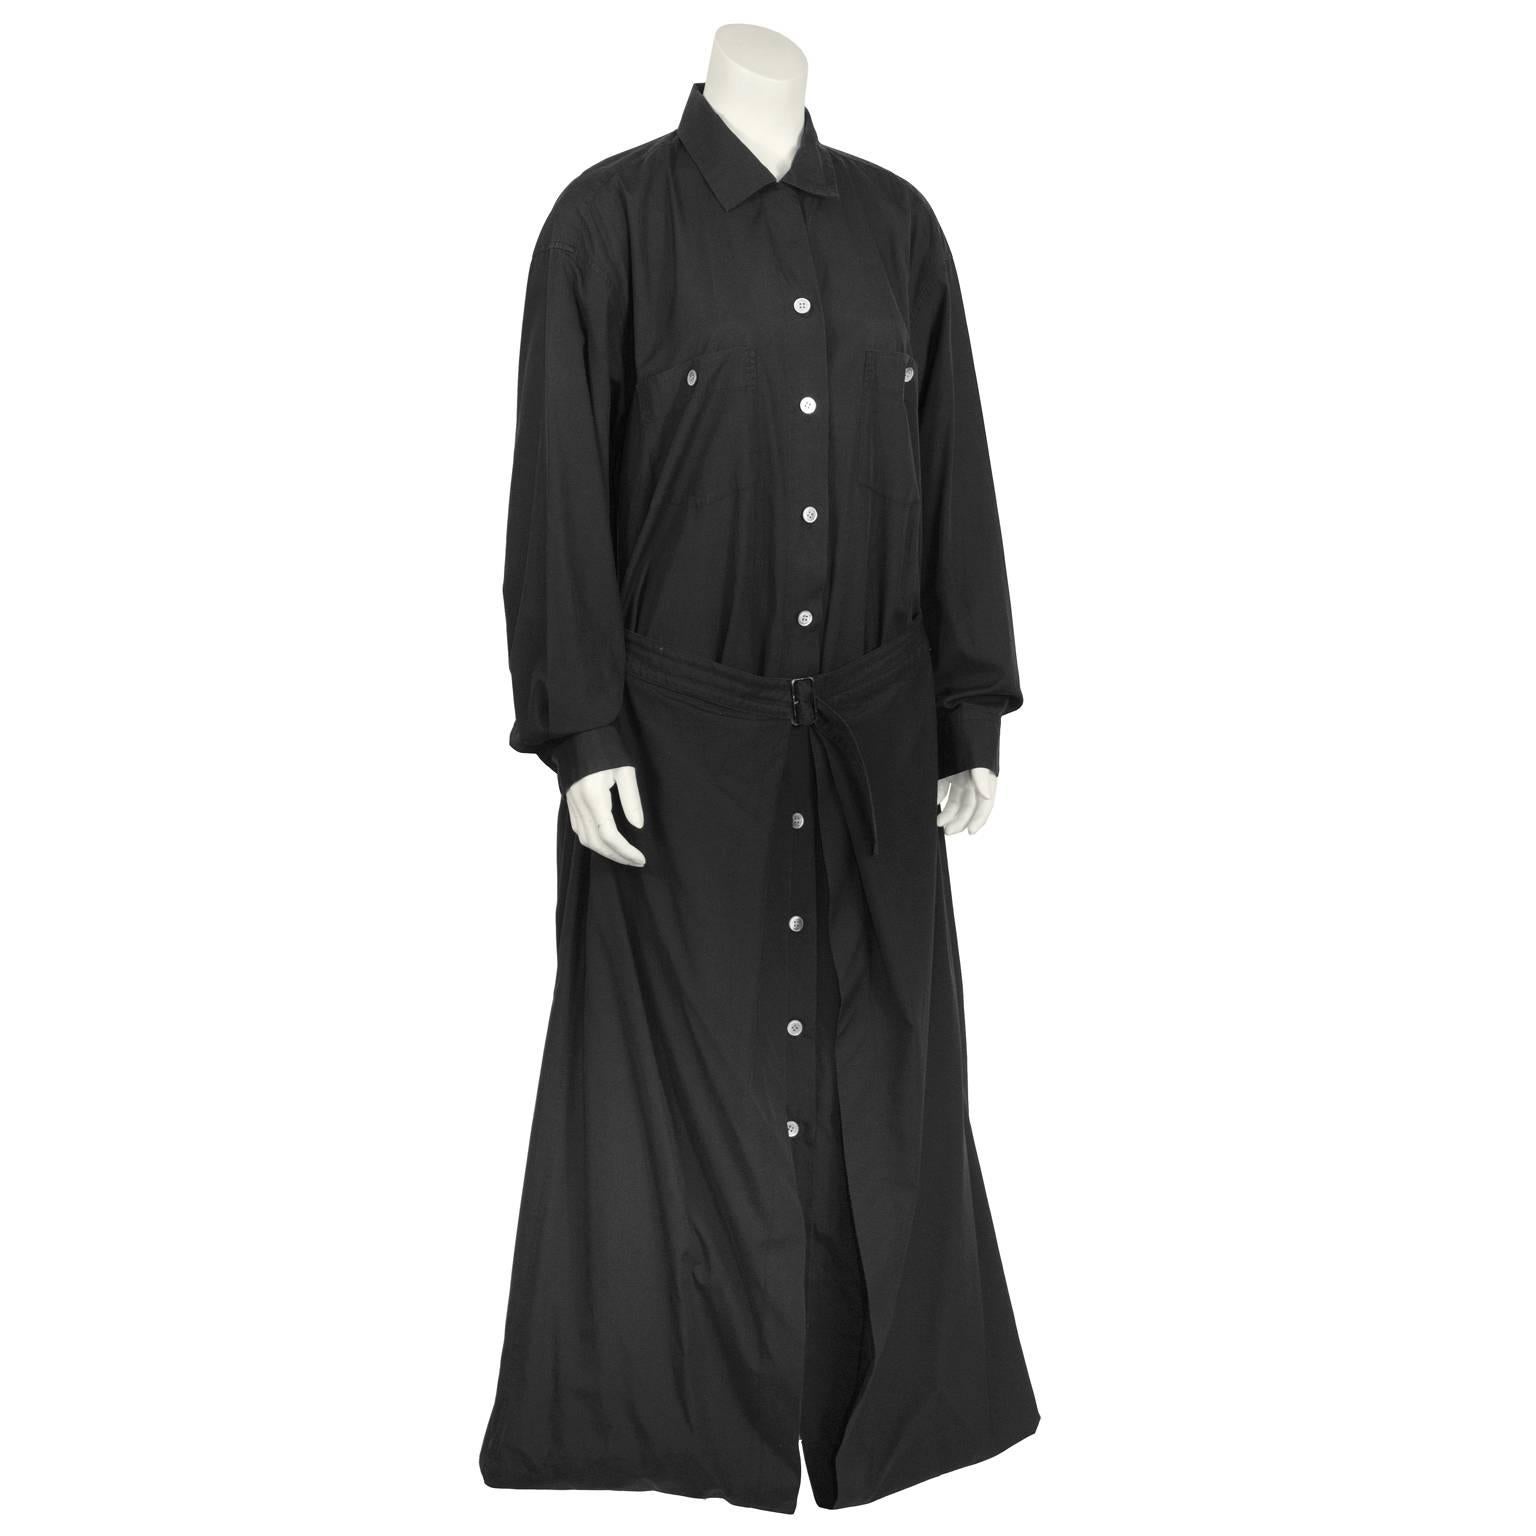 Amazing Issey Miyake black cotton maxi length shirt dress from the 1980's constructed with a notched collar, front button closure, two breast pockets, and a waist belt. Fabulous and unique balloon skirt with a fold over hem. Excellent vintage